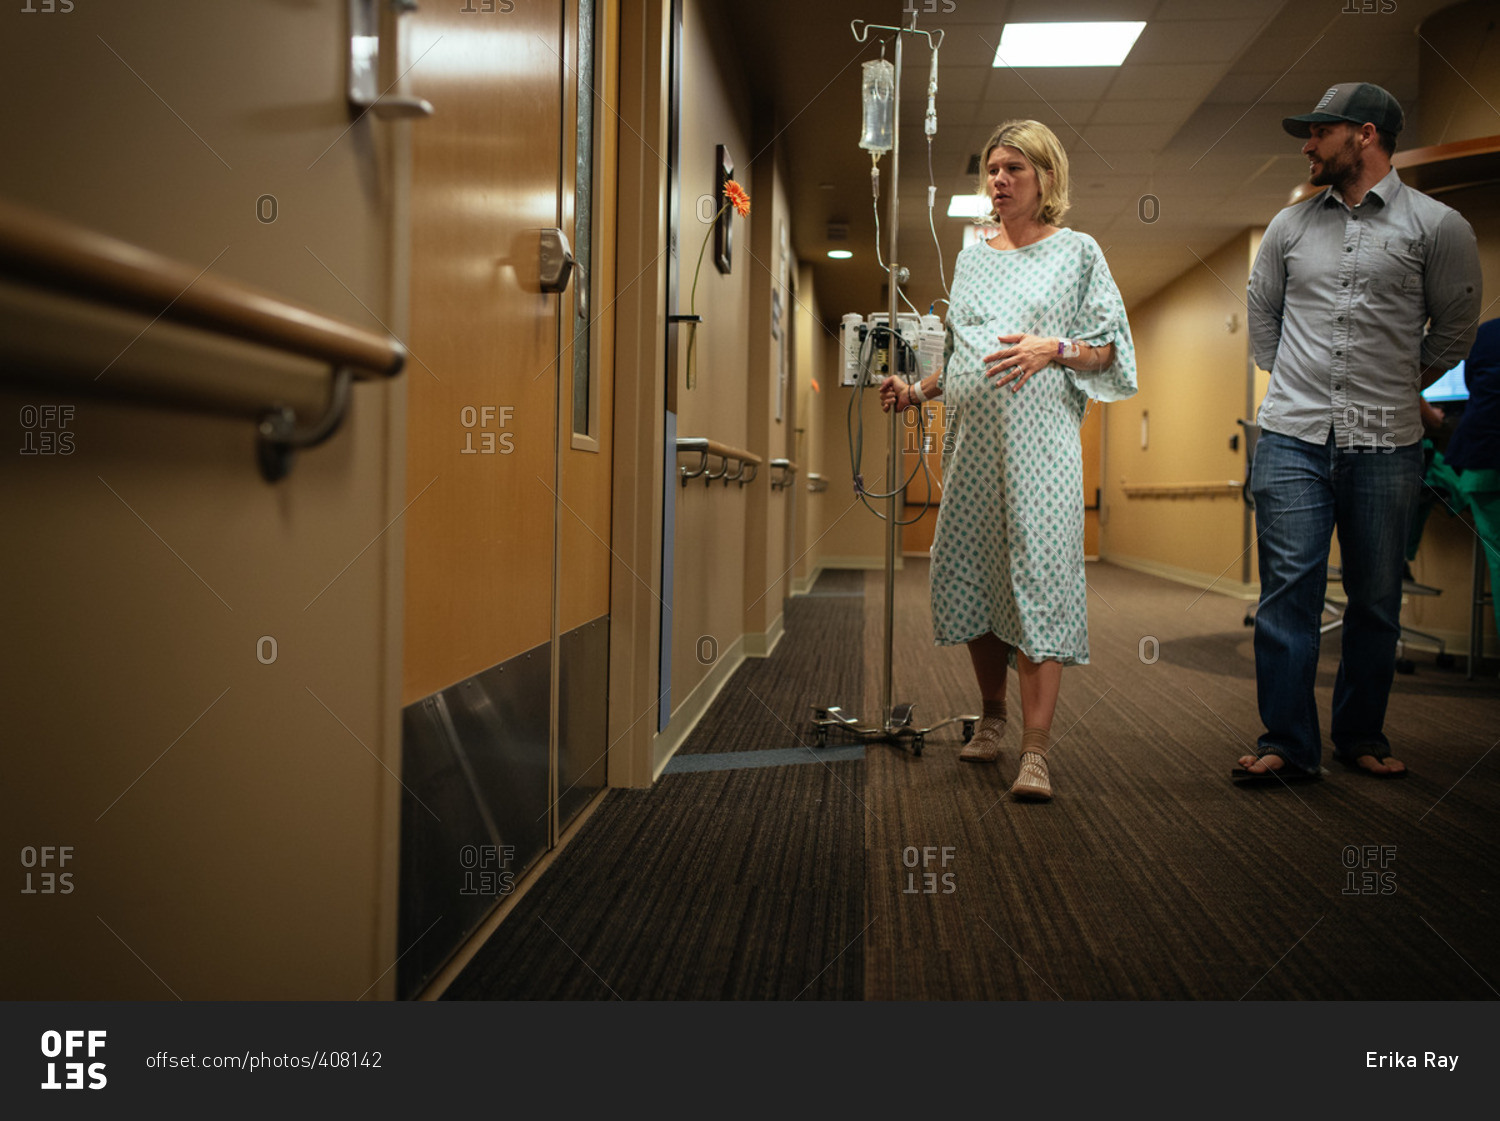 Pregnant woman walking with her husband in a hospital hallway during pre-labor